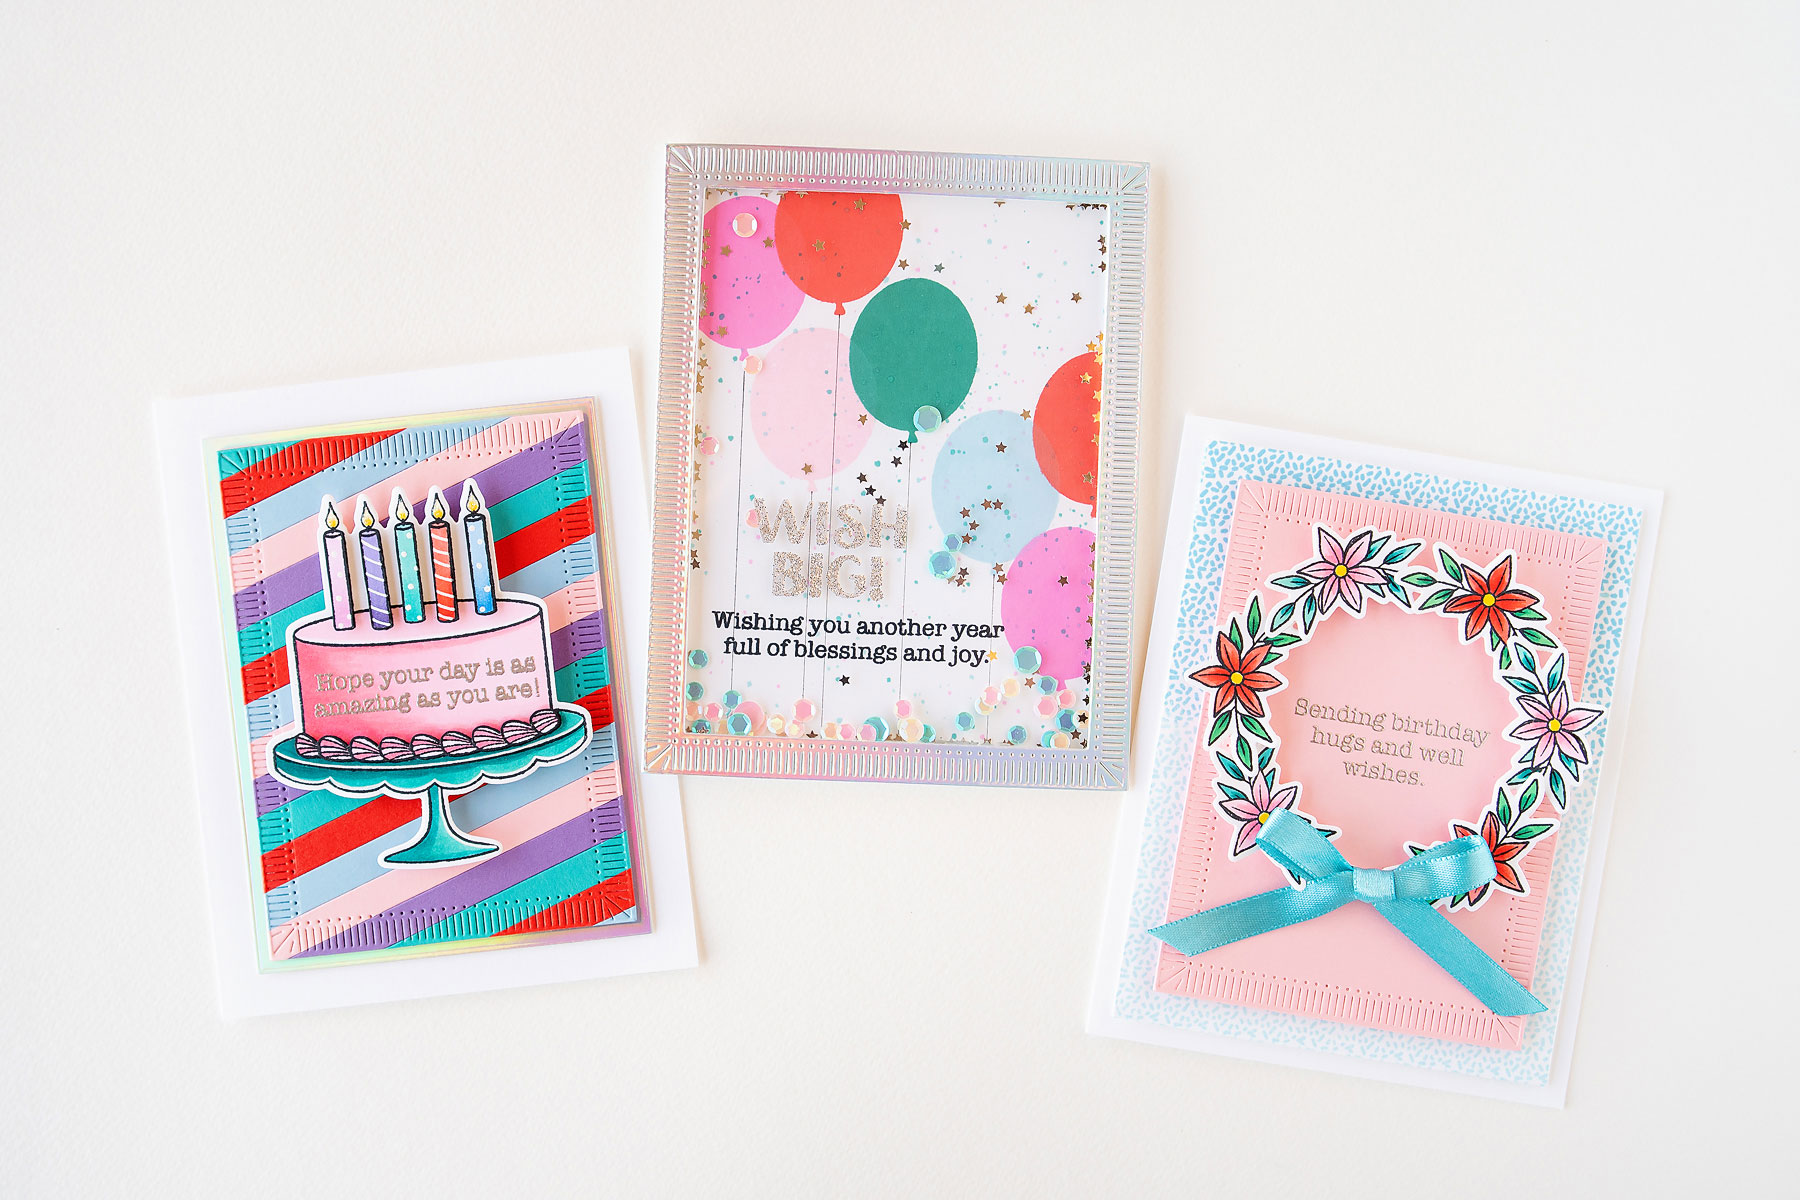 Back To Basics - Sentiment Stamp - Birthday - Keep It Simple Paper Crafts